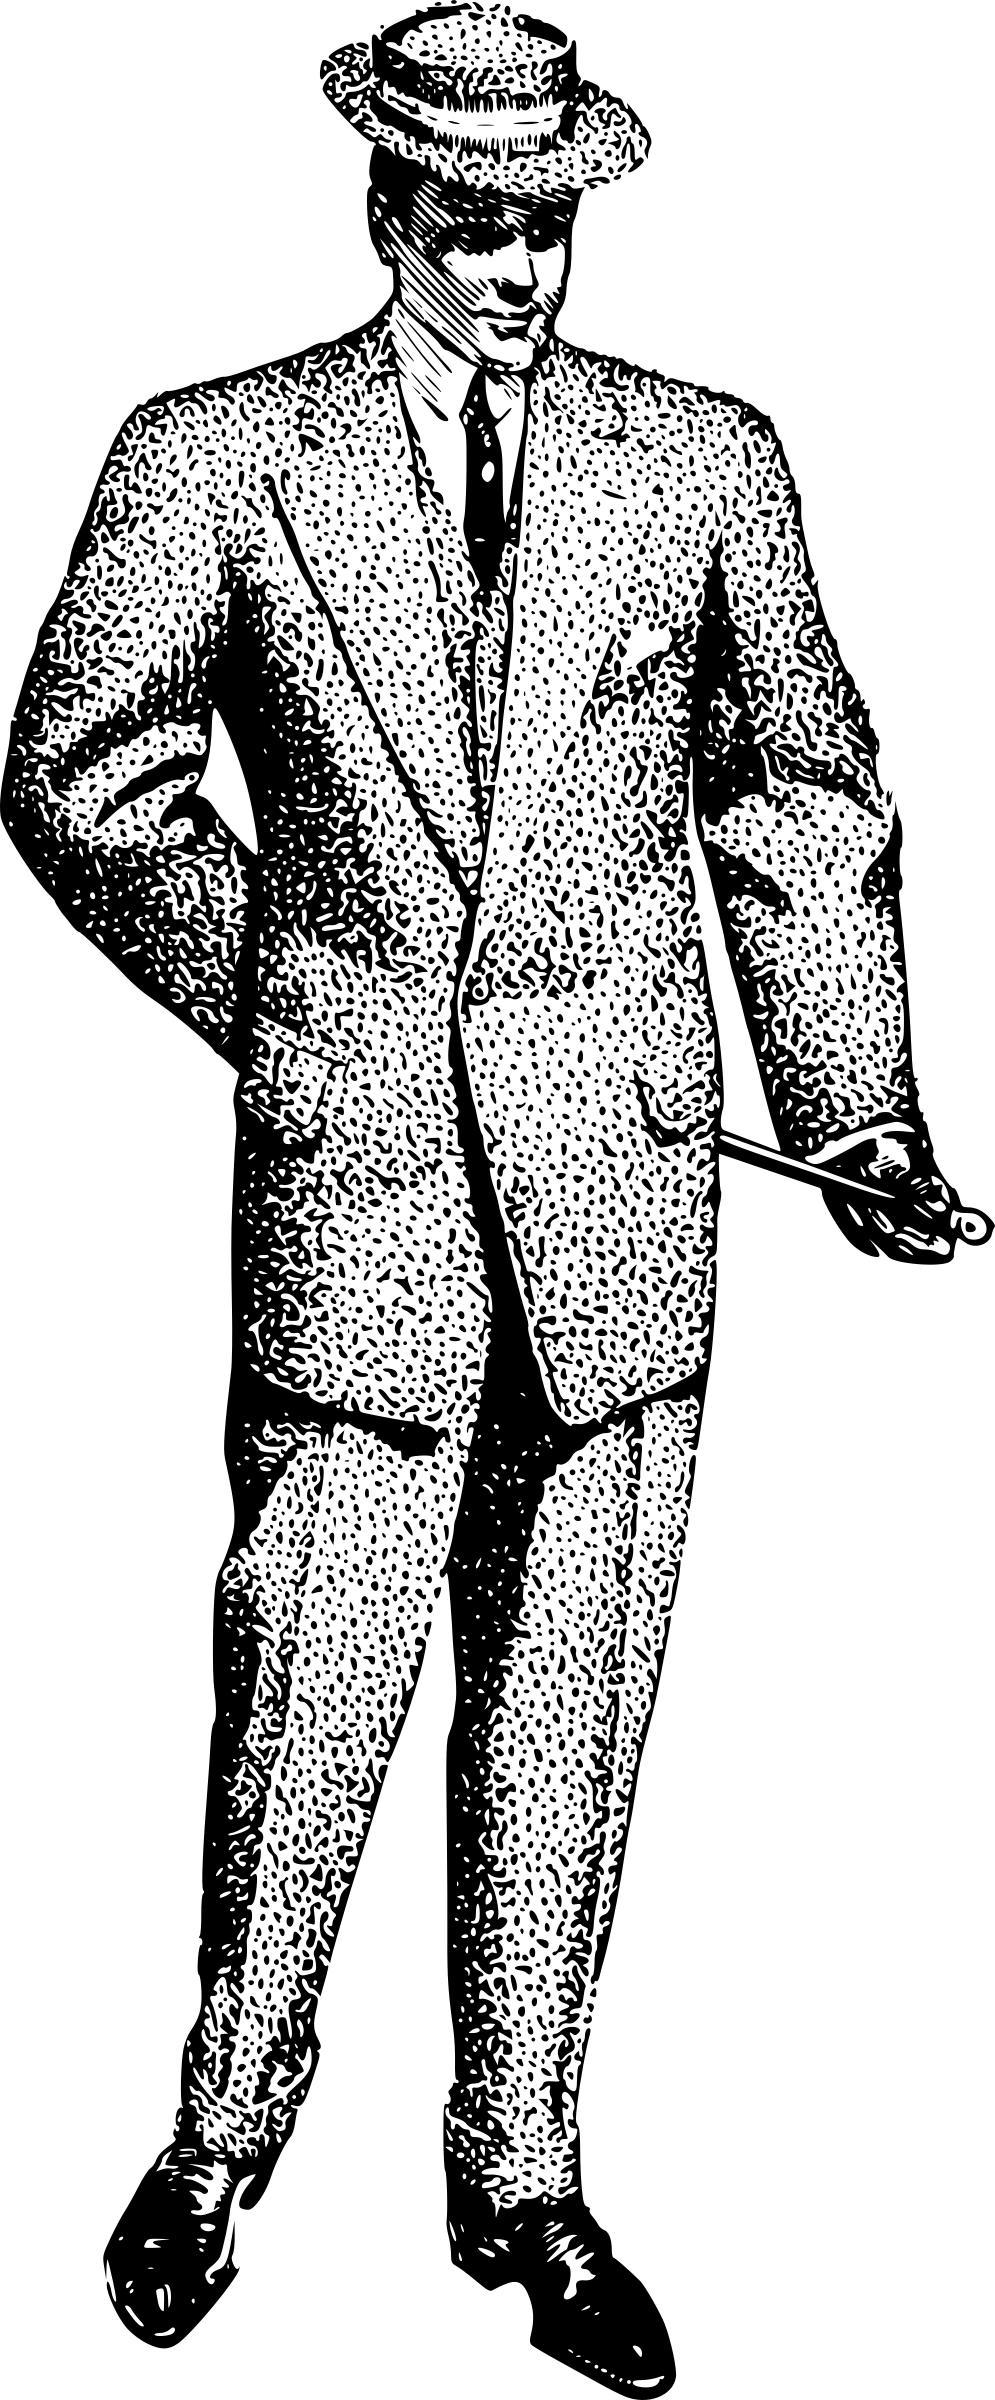 Man in a Cool Suit png transparent